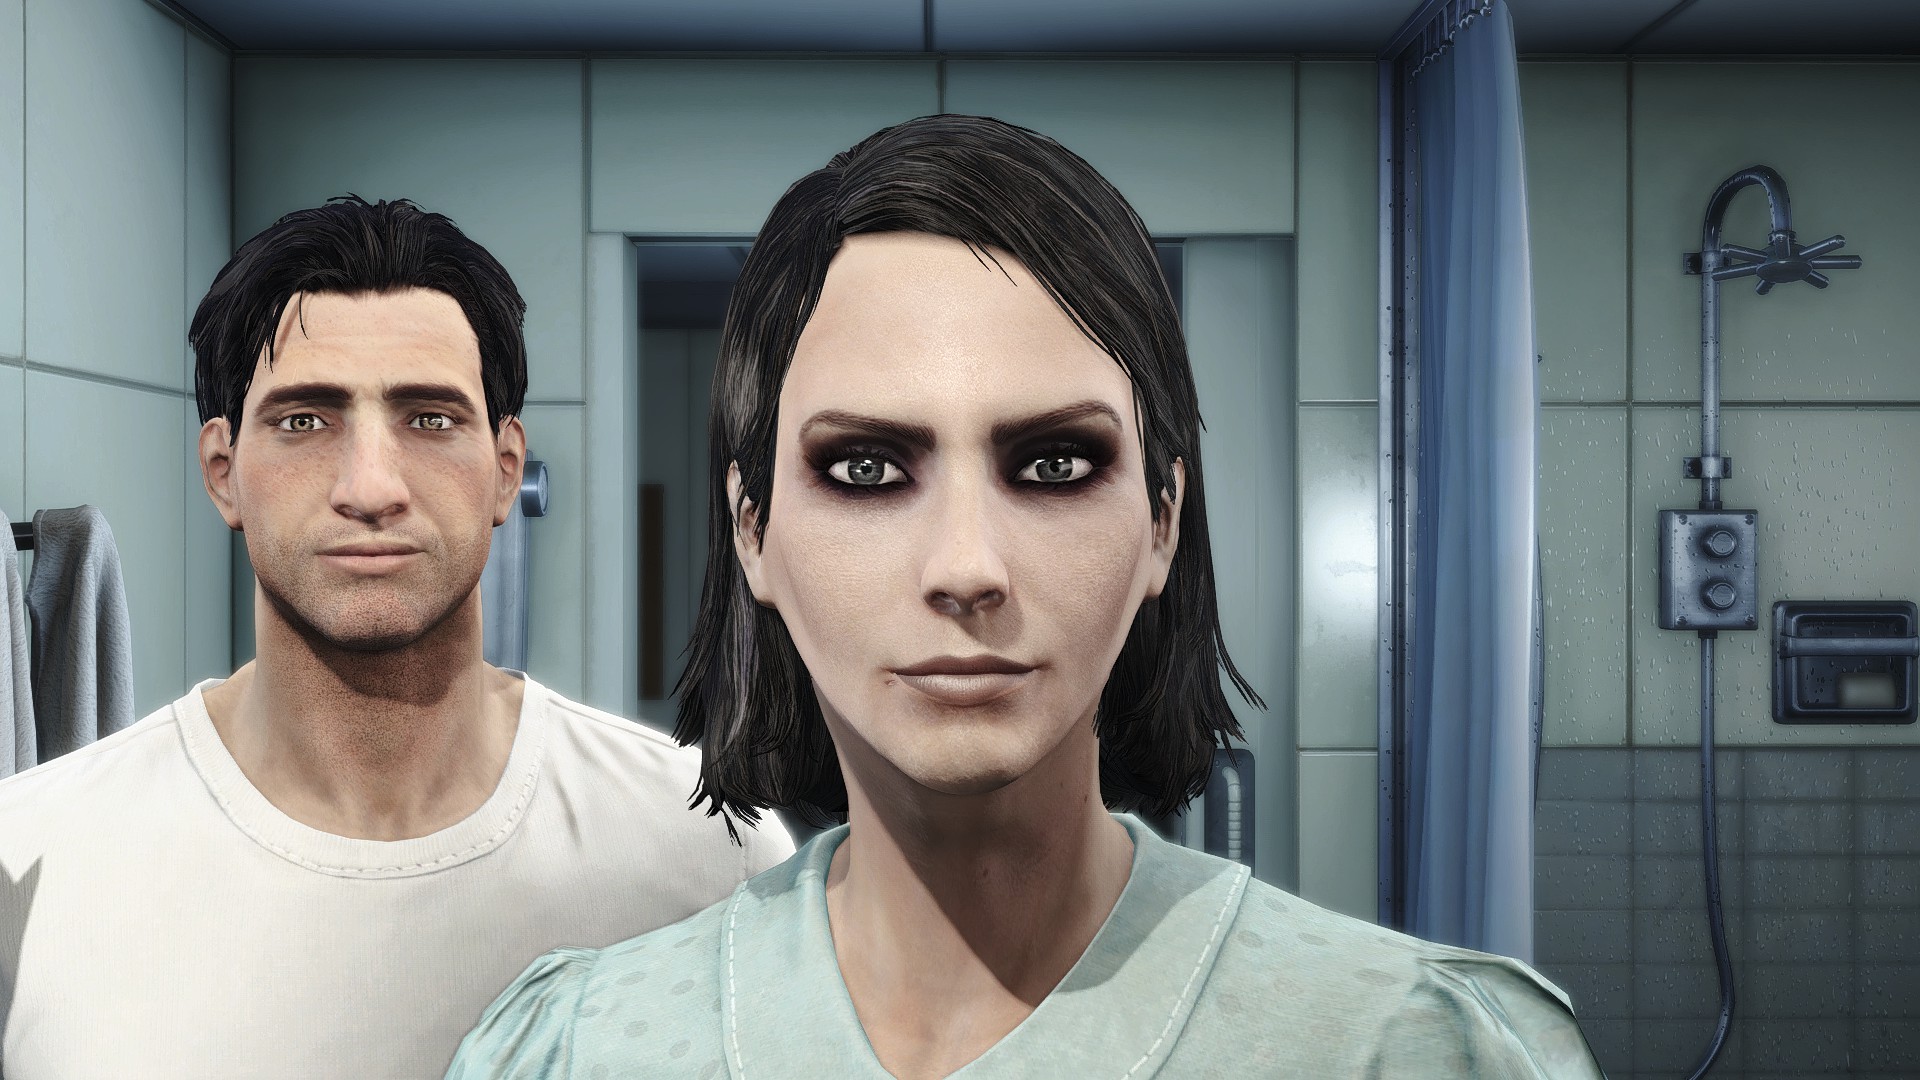 Real hd face textures 2k fallout 4 фото 16